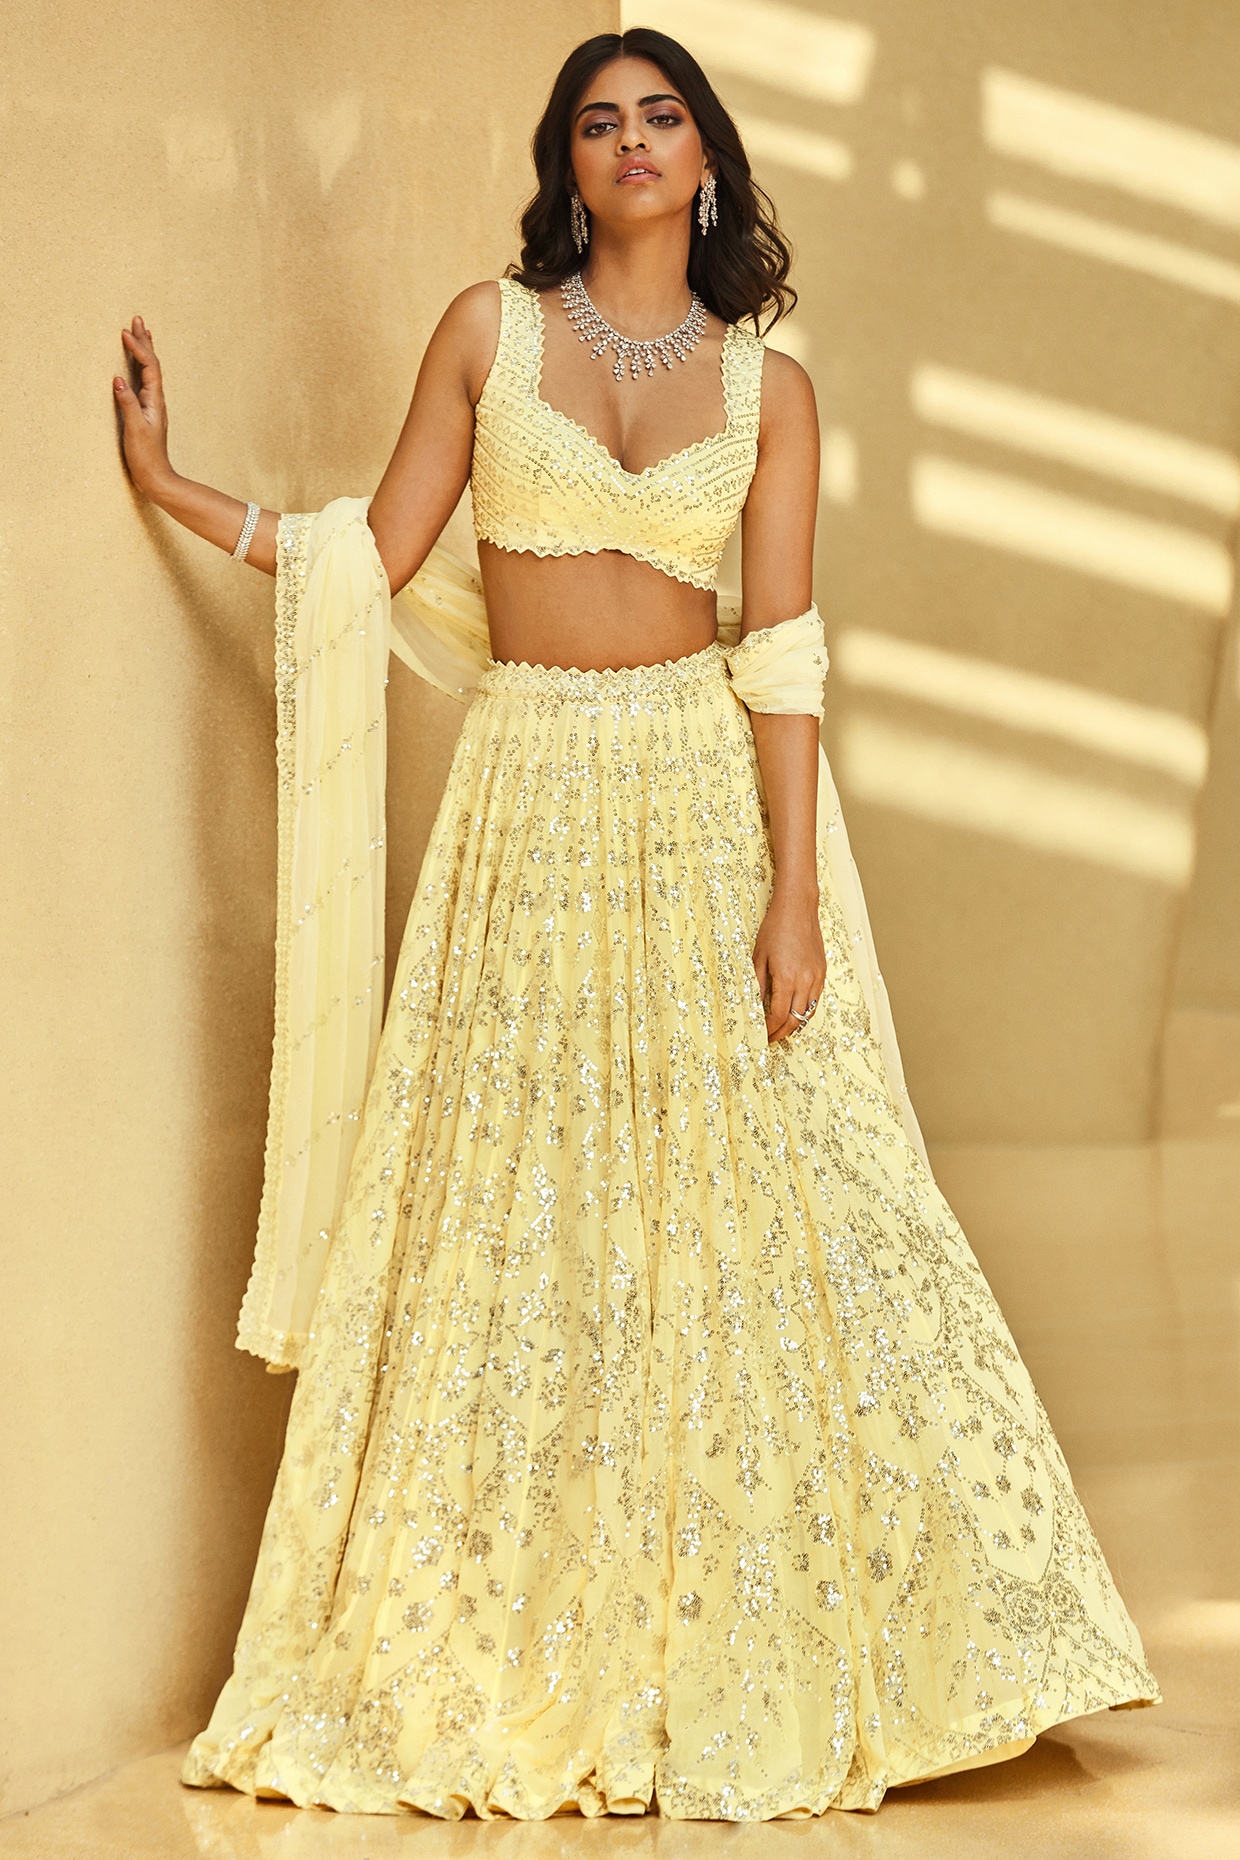 How To Choose A Perfect Indian Wedding Dress According To Your Skin Tone